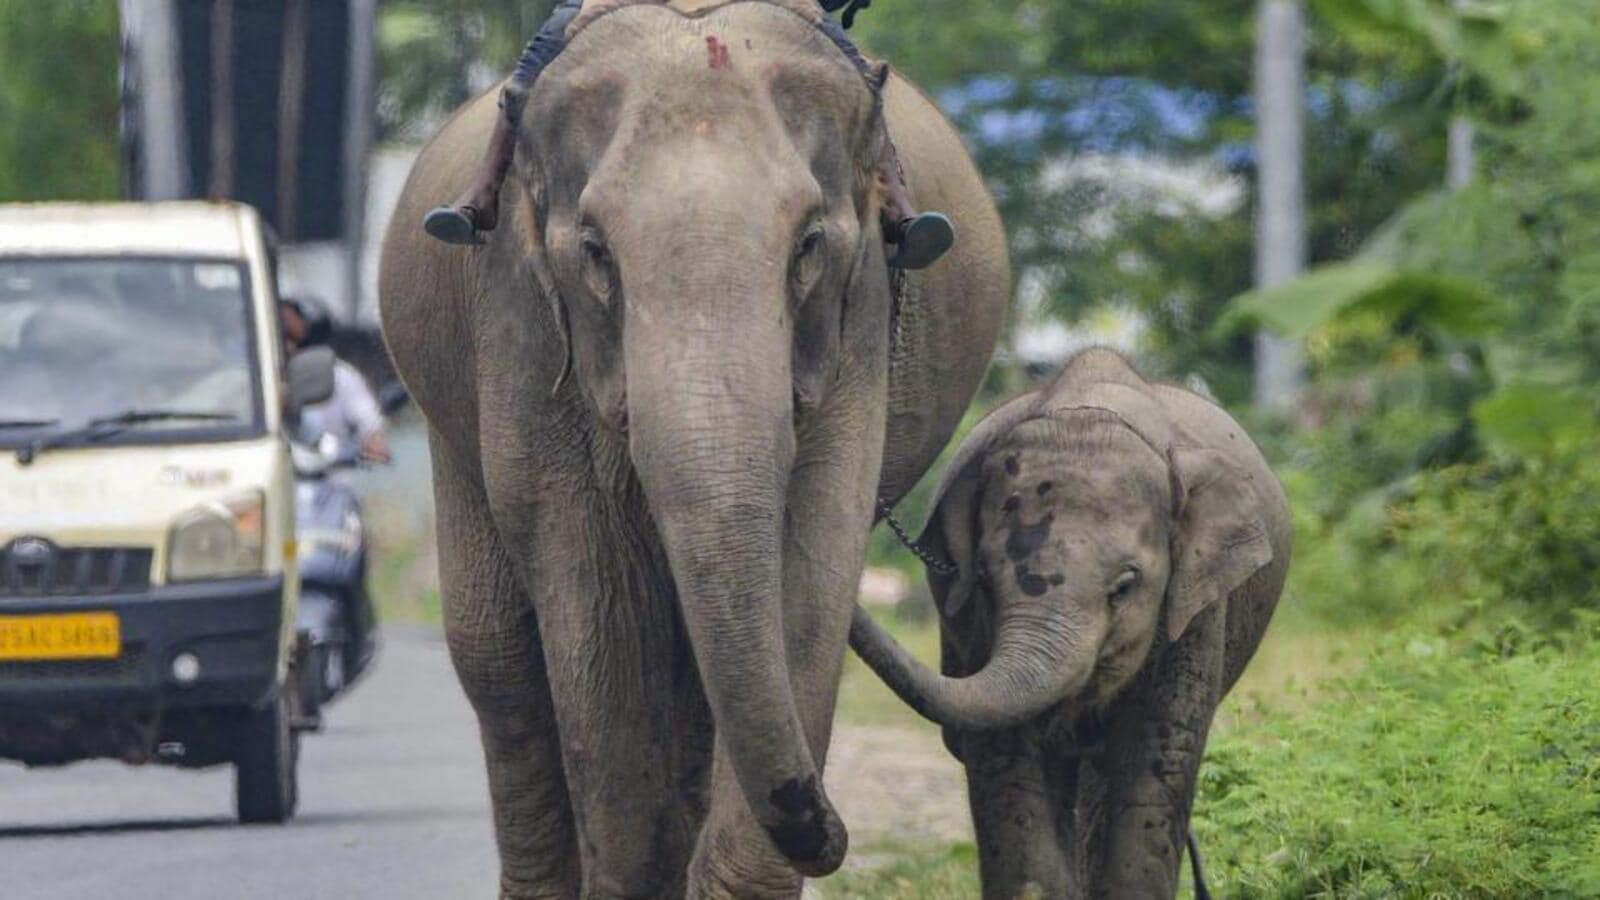 Range of sounds deployed to spook elephants in Assam amid incidents of  human conflict | Latest News India - Hindustan Times